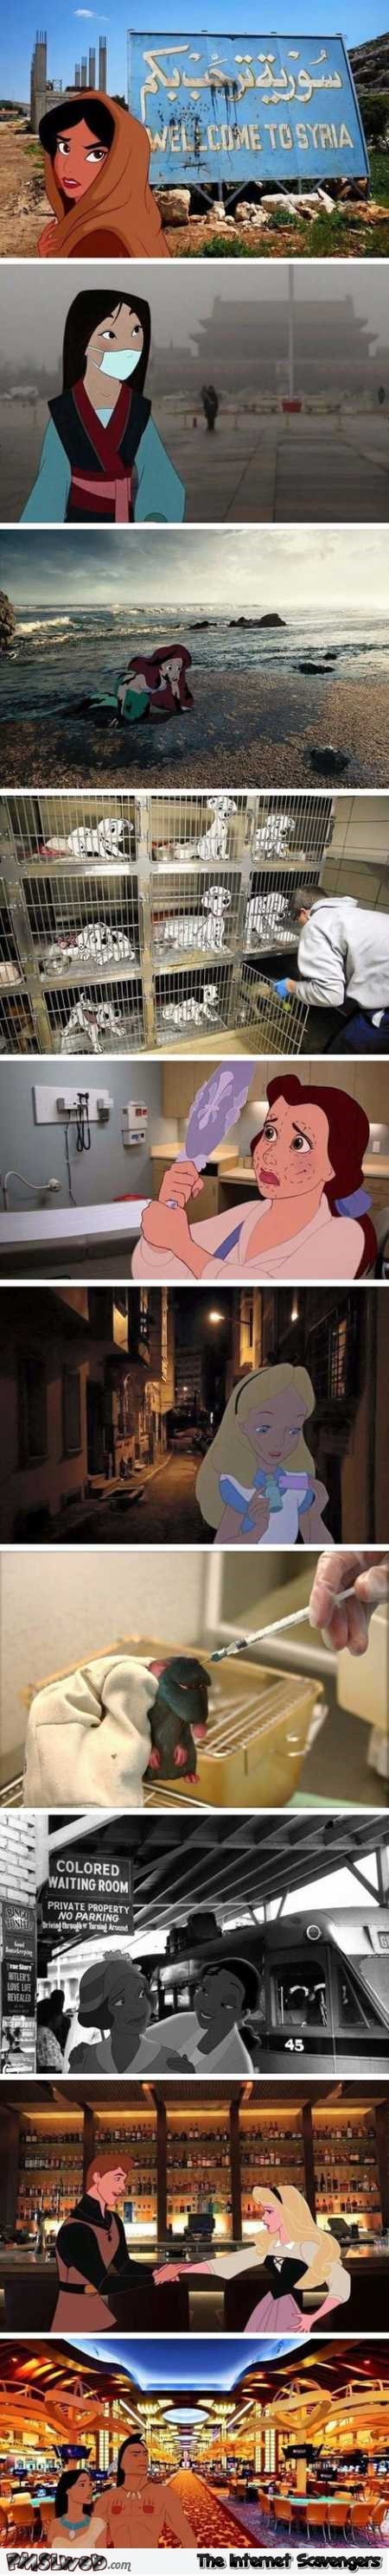 Disney characters in real life situations @PMSLweb.com